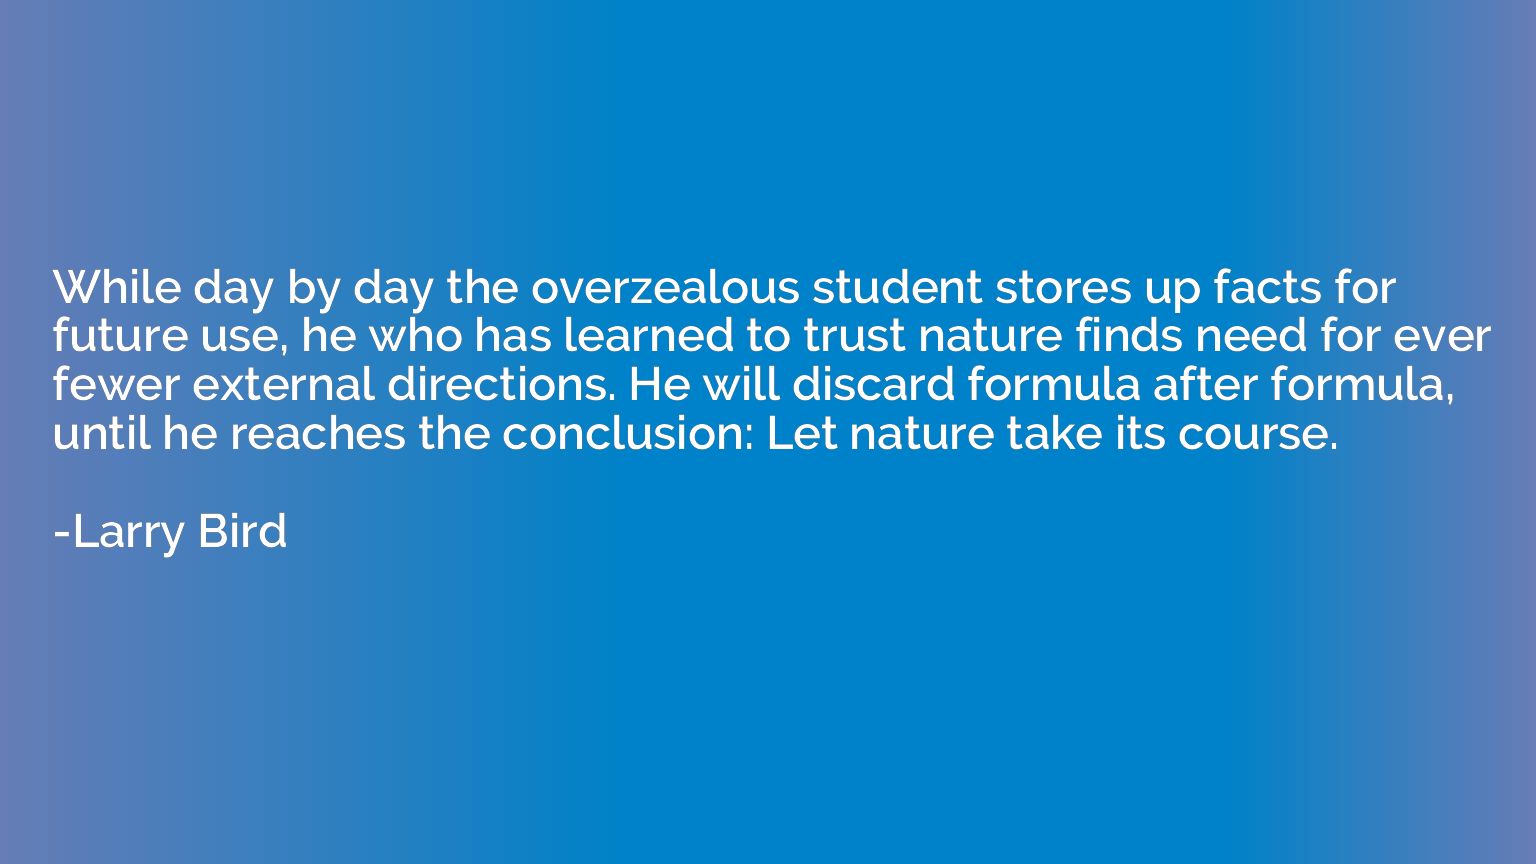 While day by day the overzealous student stores up facts for